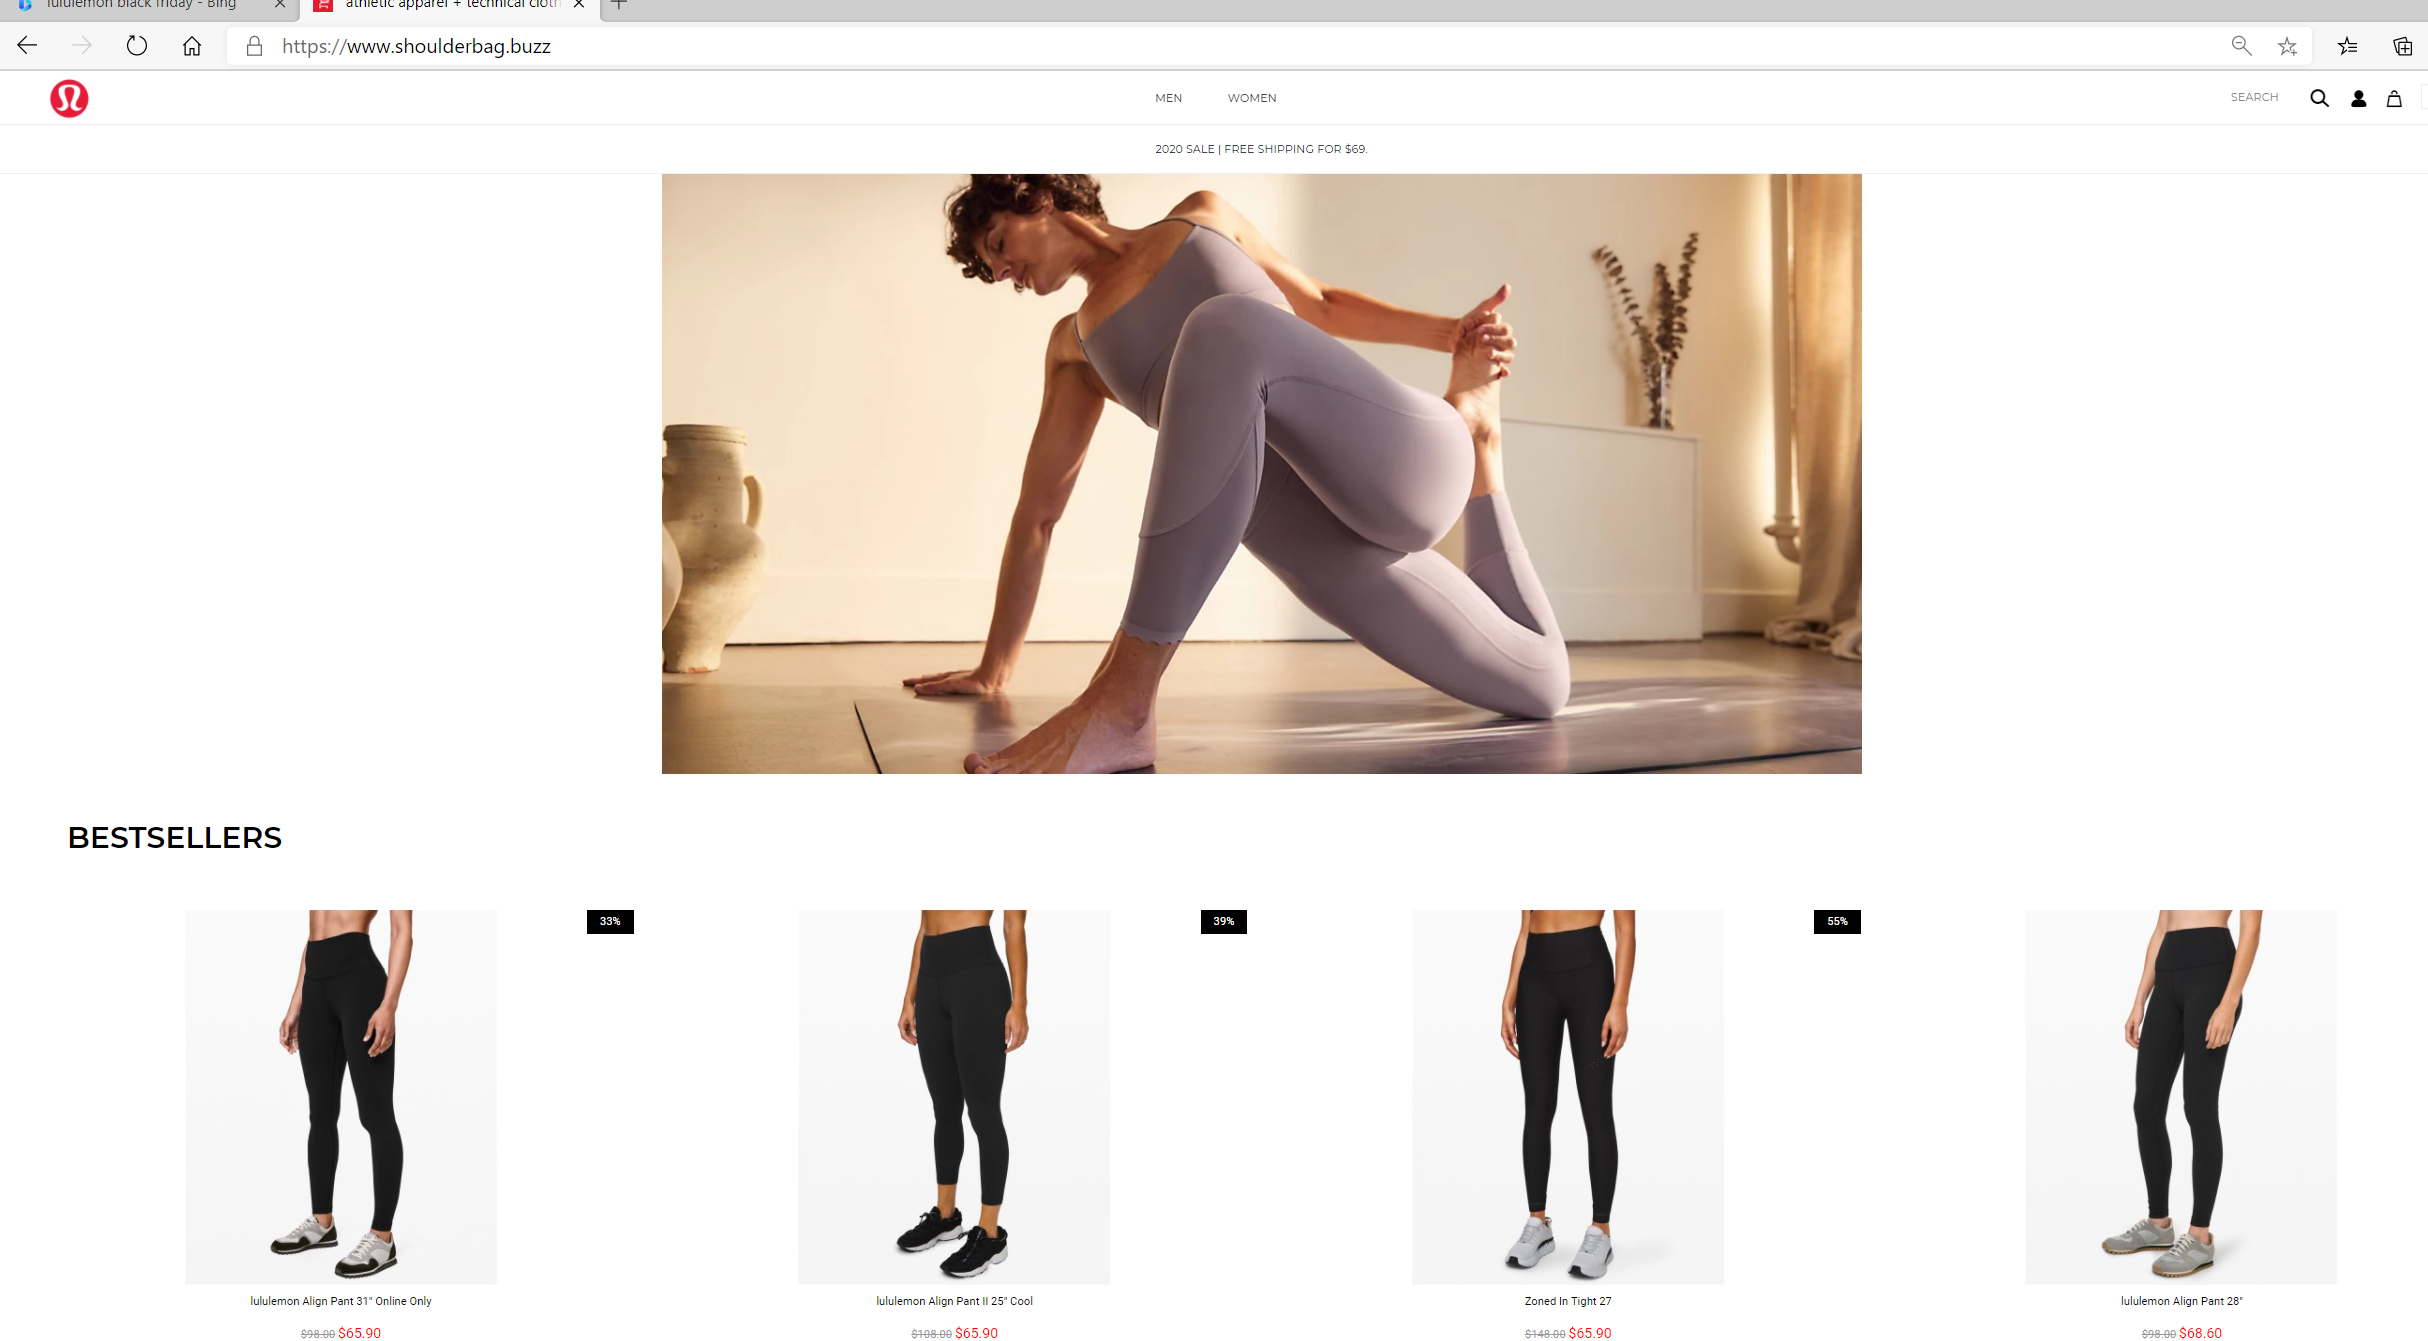 BRIEF: J. Crew Shuts All But 1 Store in Canada, Lululemon Expanding Flagship